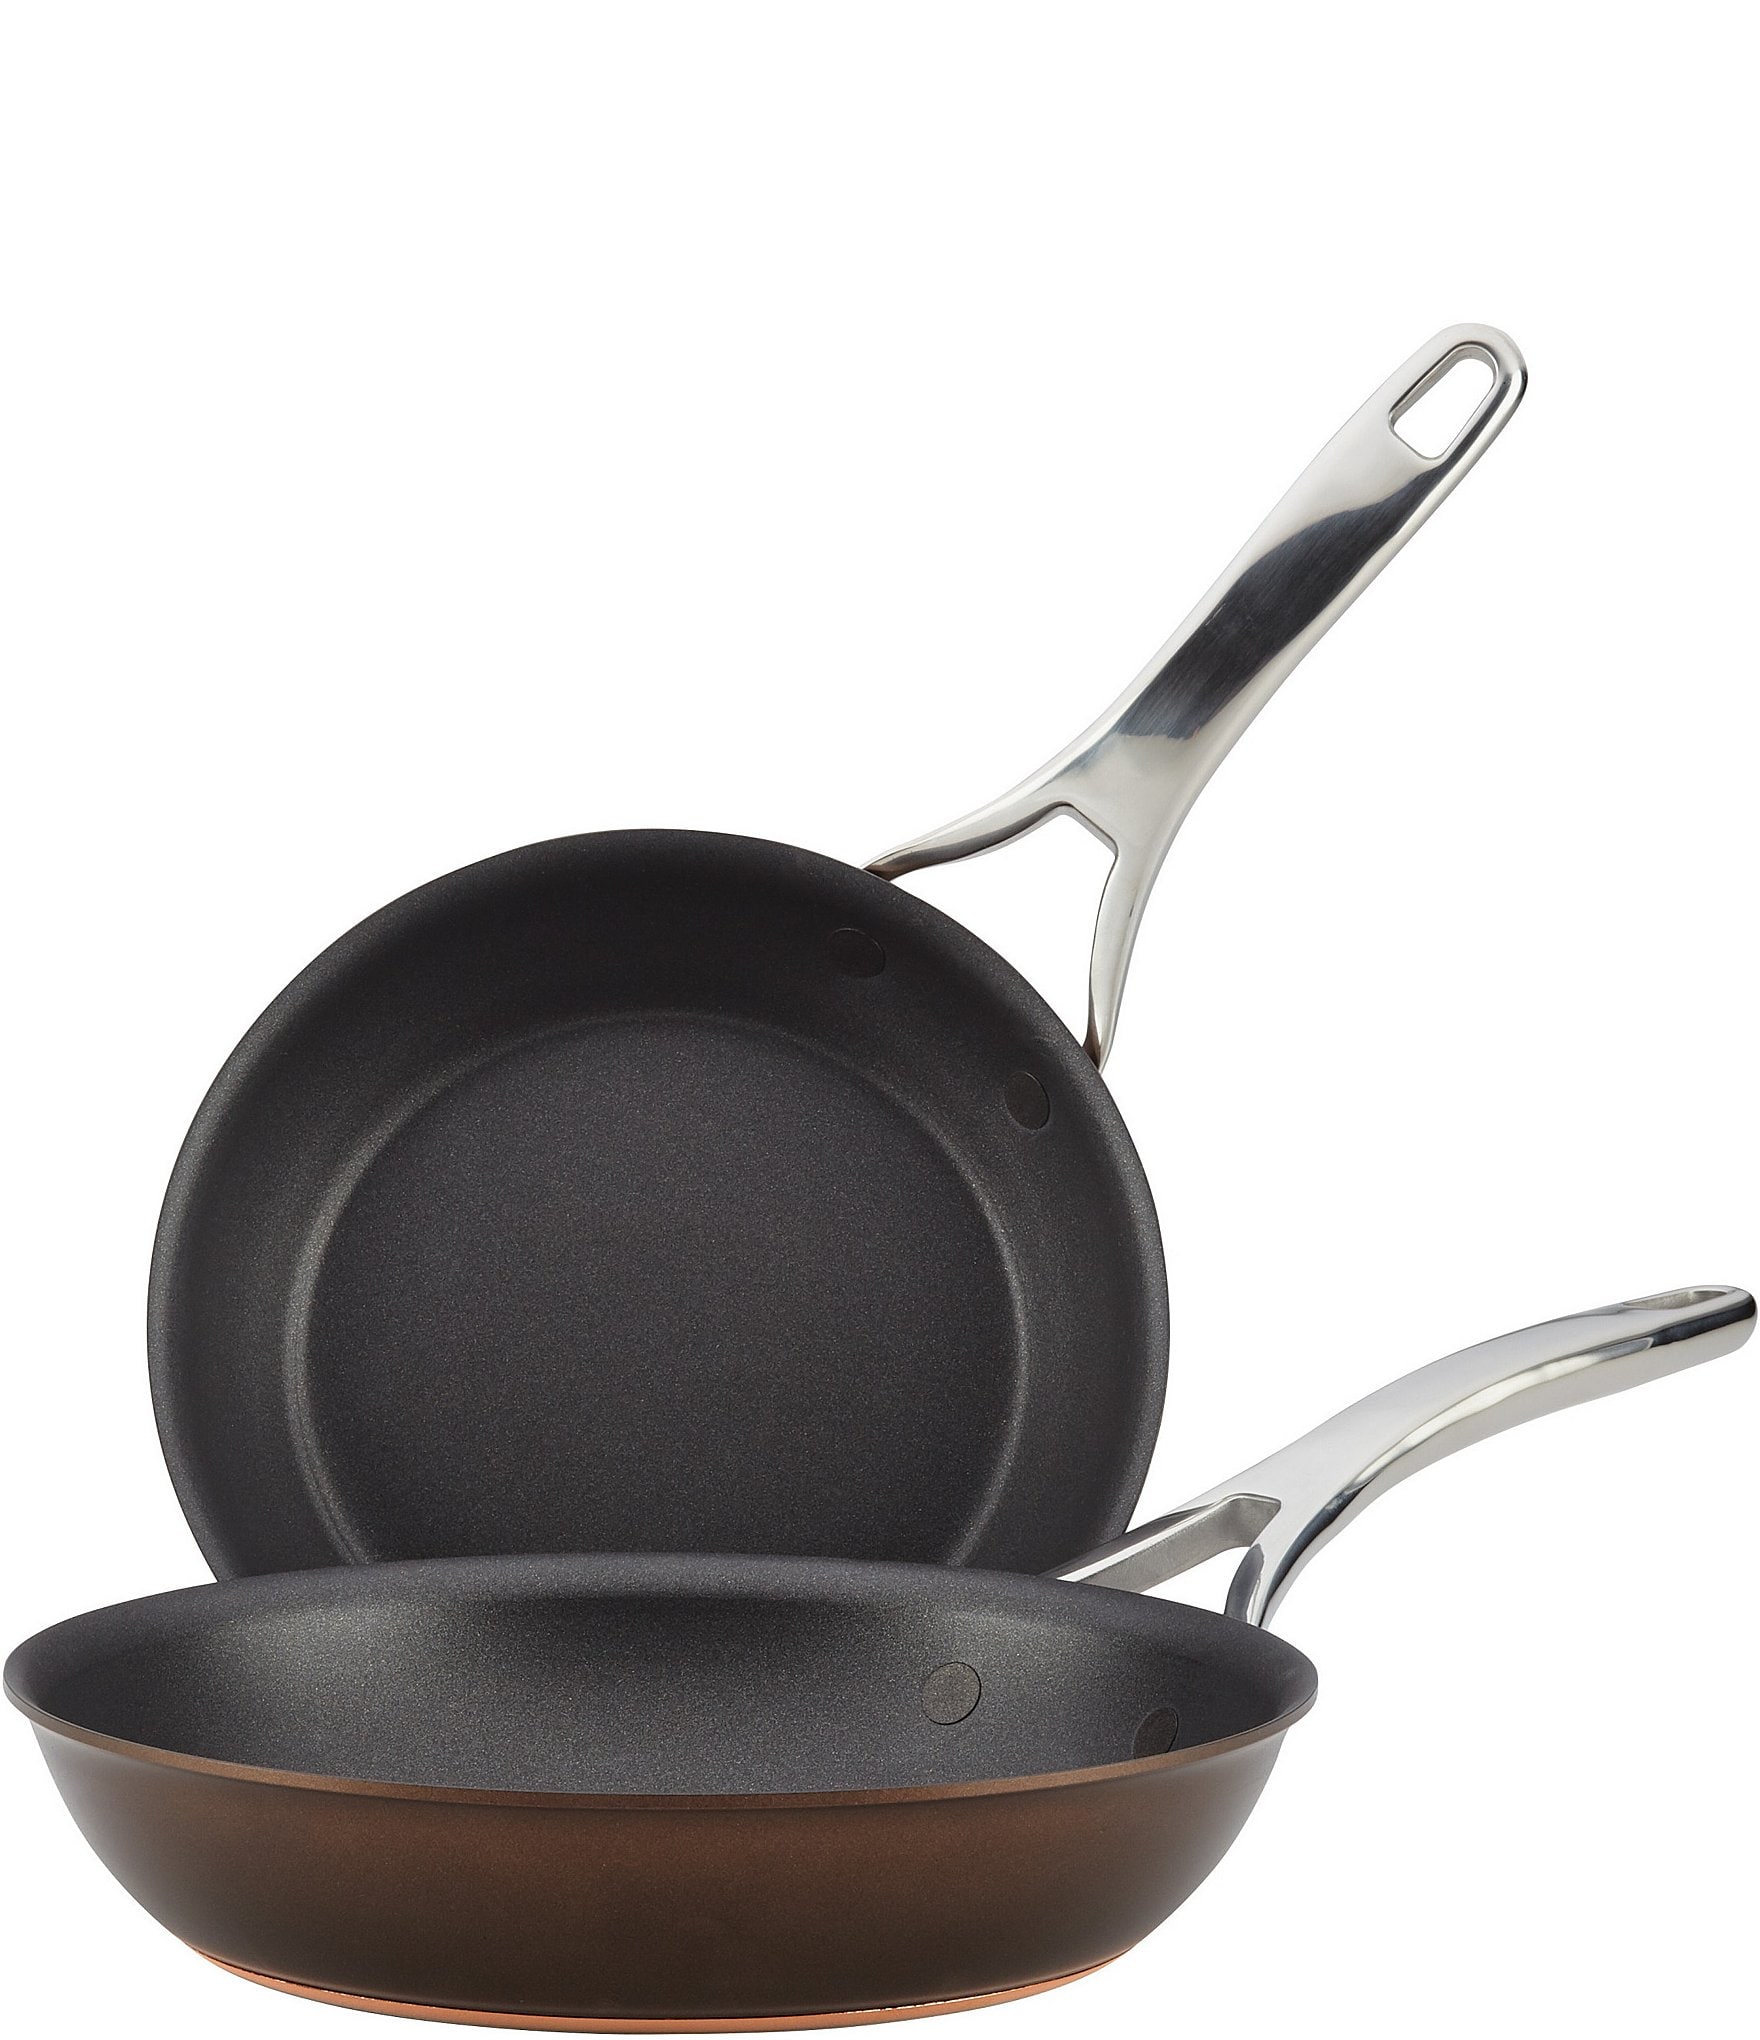 What Are Copper Nonstick Pans